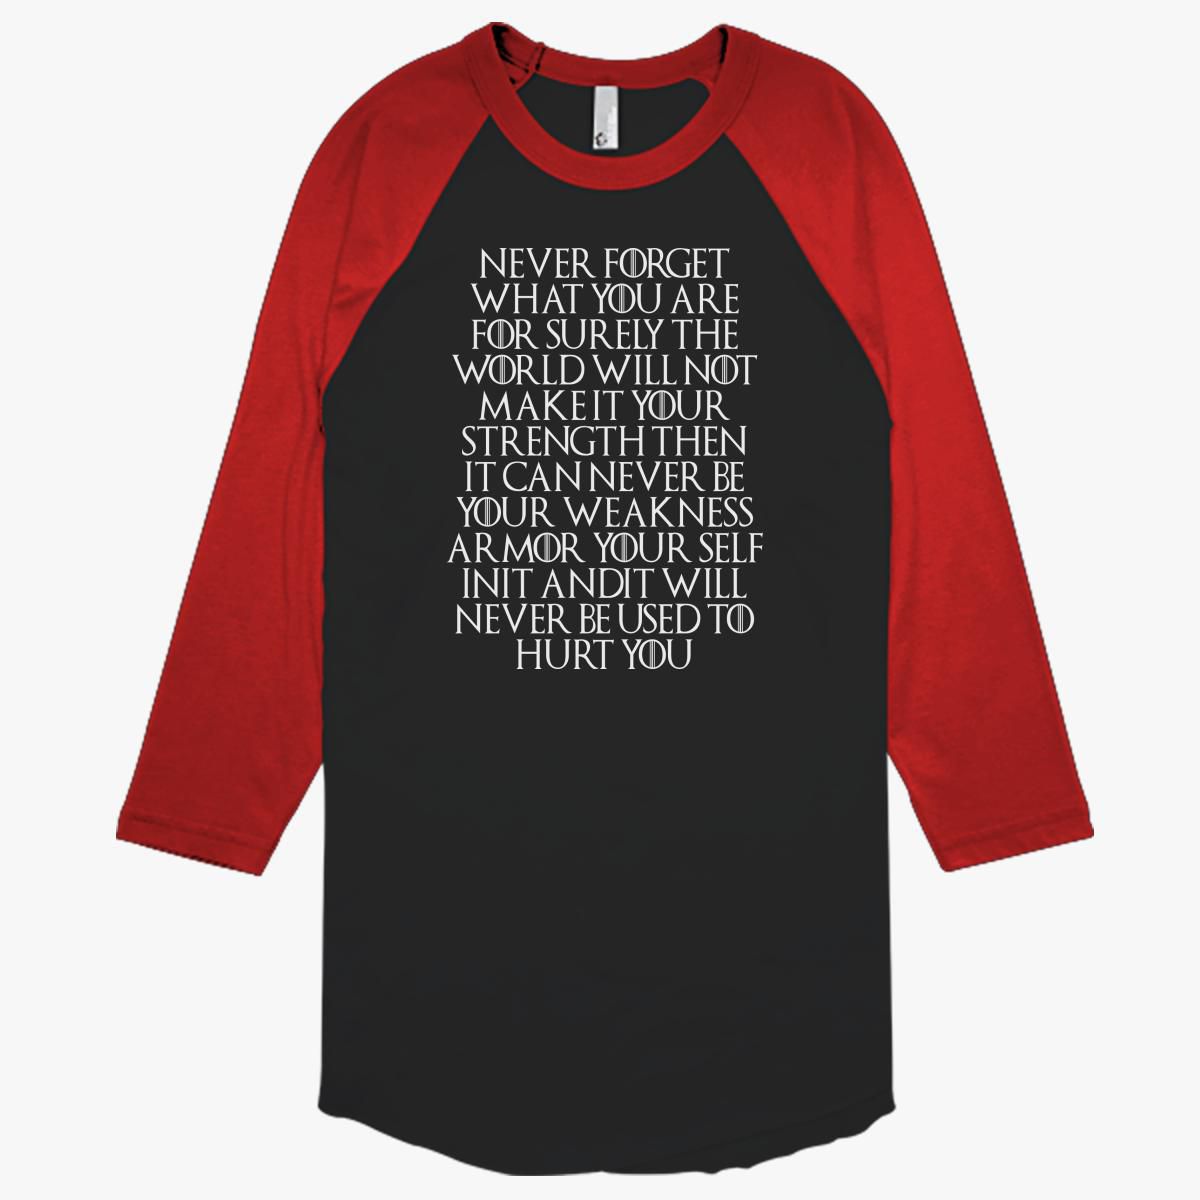 never-forget-who-you-are---tyrion-lannister-quote-baseball-t-shirt-black-red.jpg